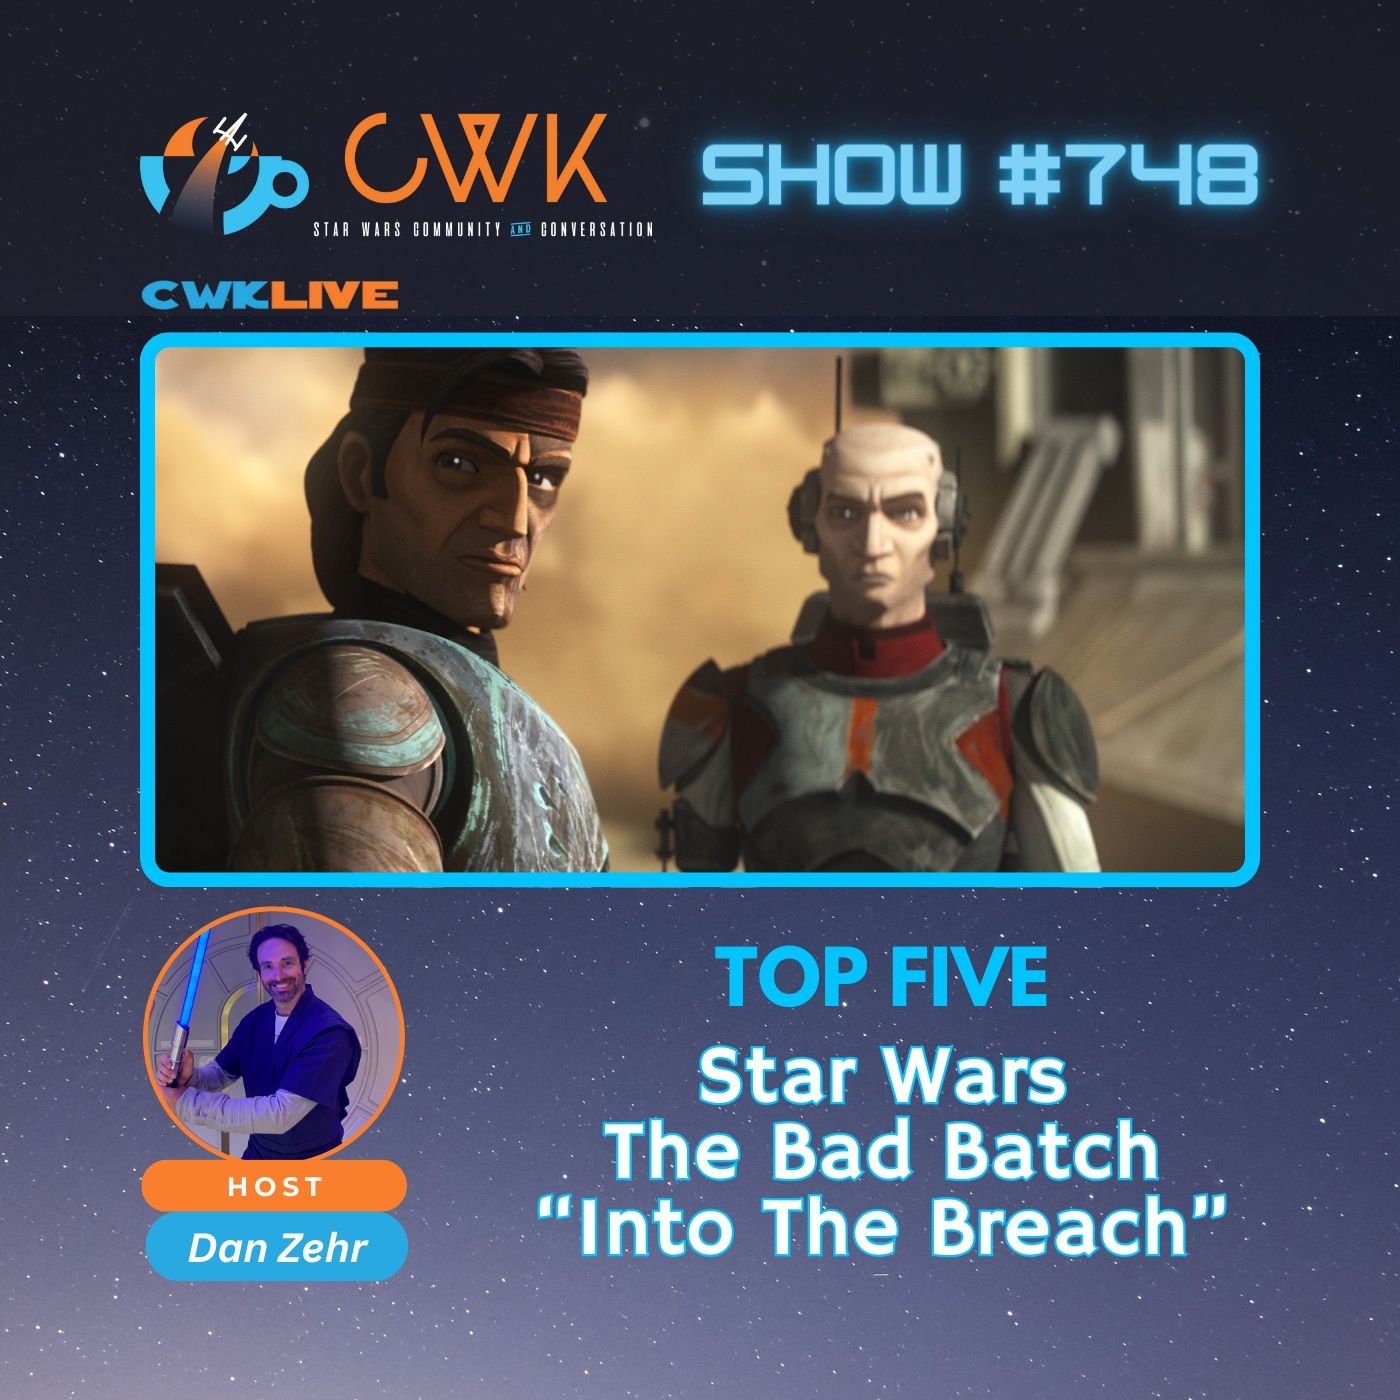 CWK Show #748 LIVE: Top Five Moments from The Bad Batch ”Into The Breach”